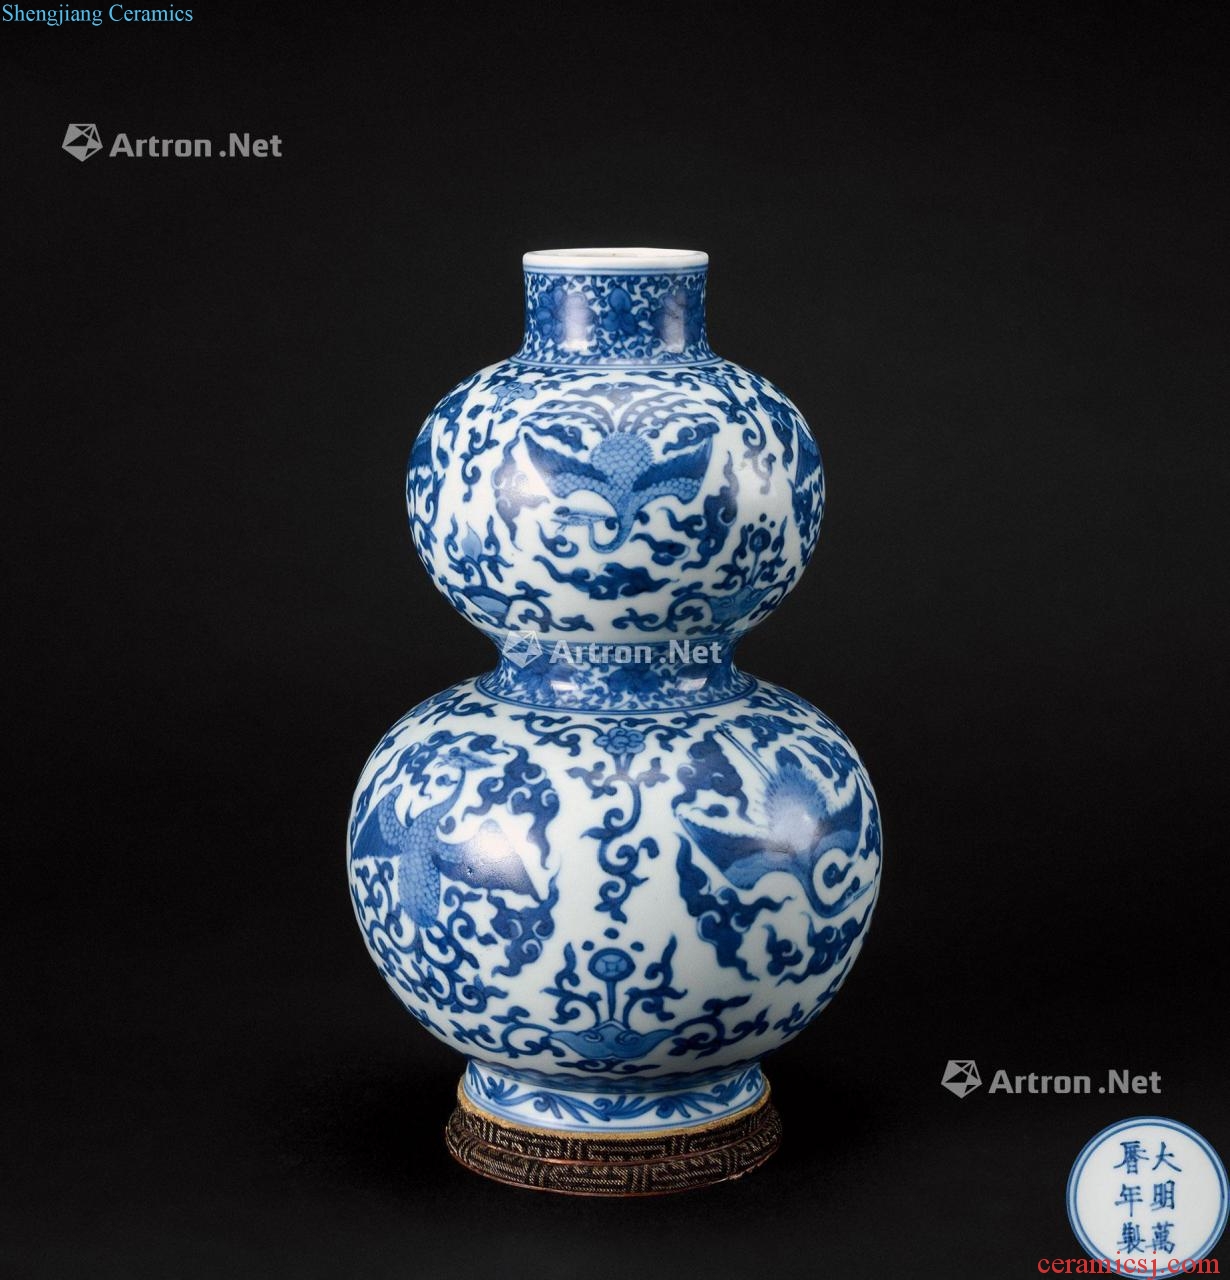 In the qing dynasty Blue and white chicken groups crane grain bottle gourd